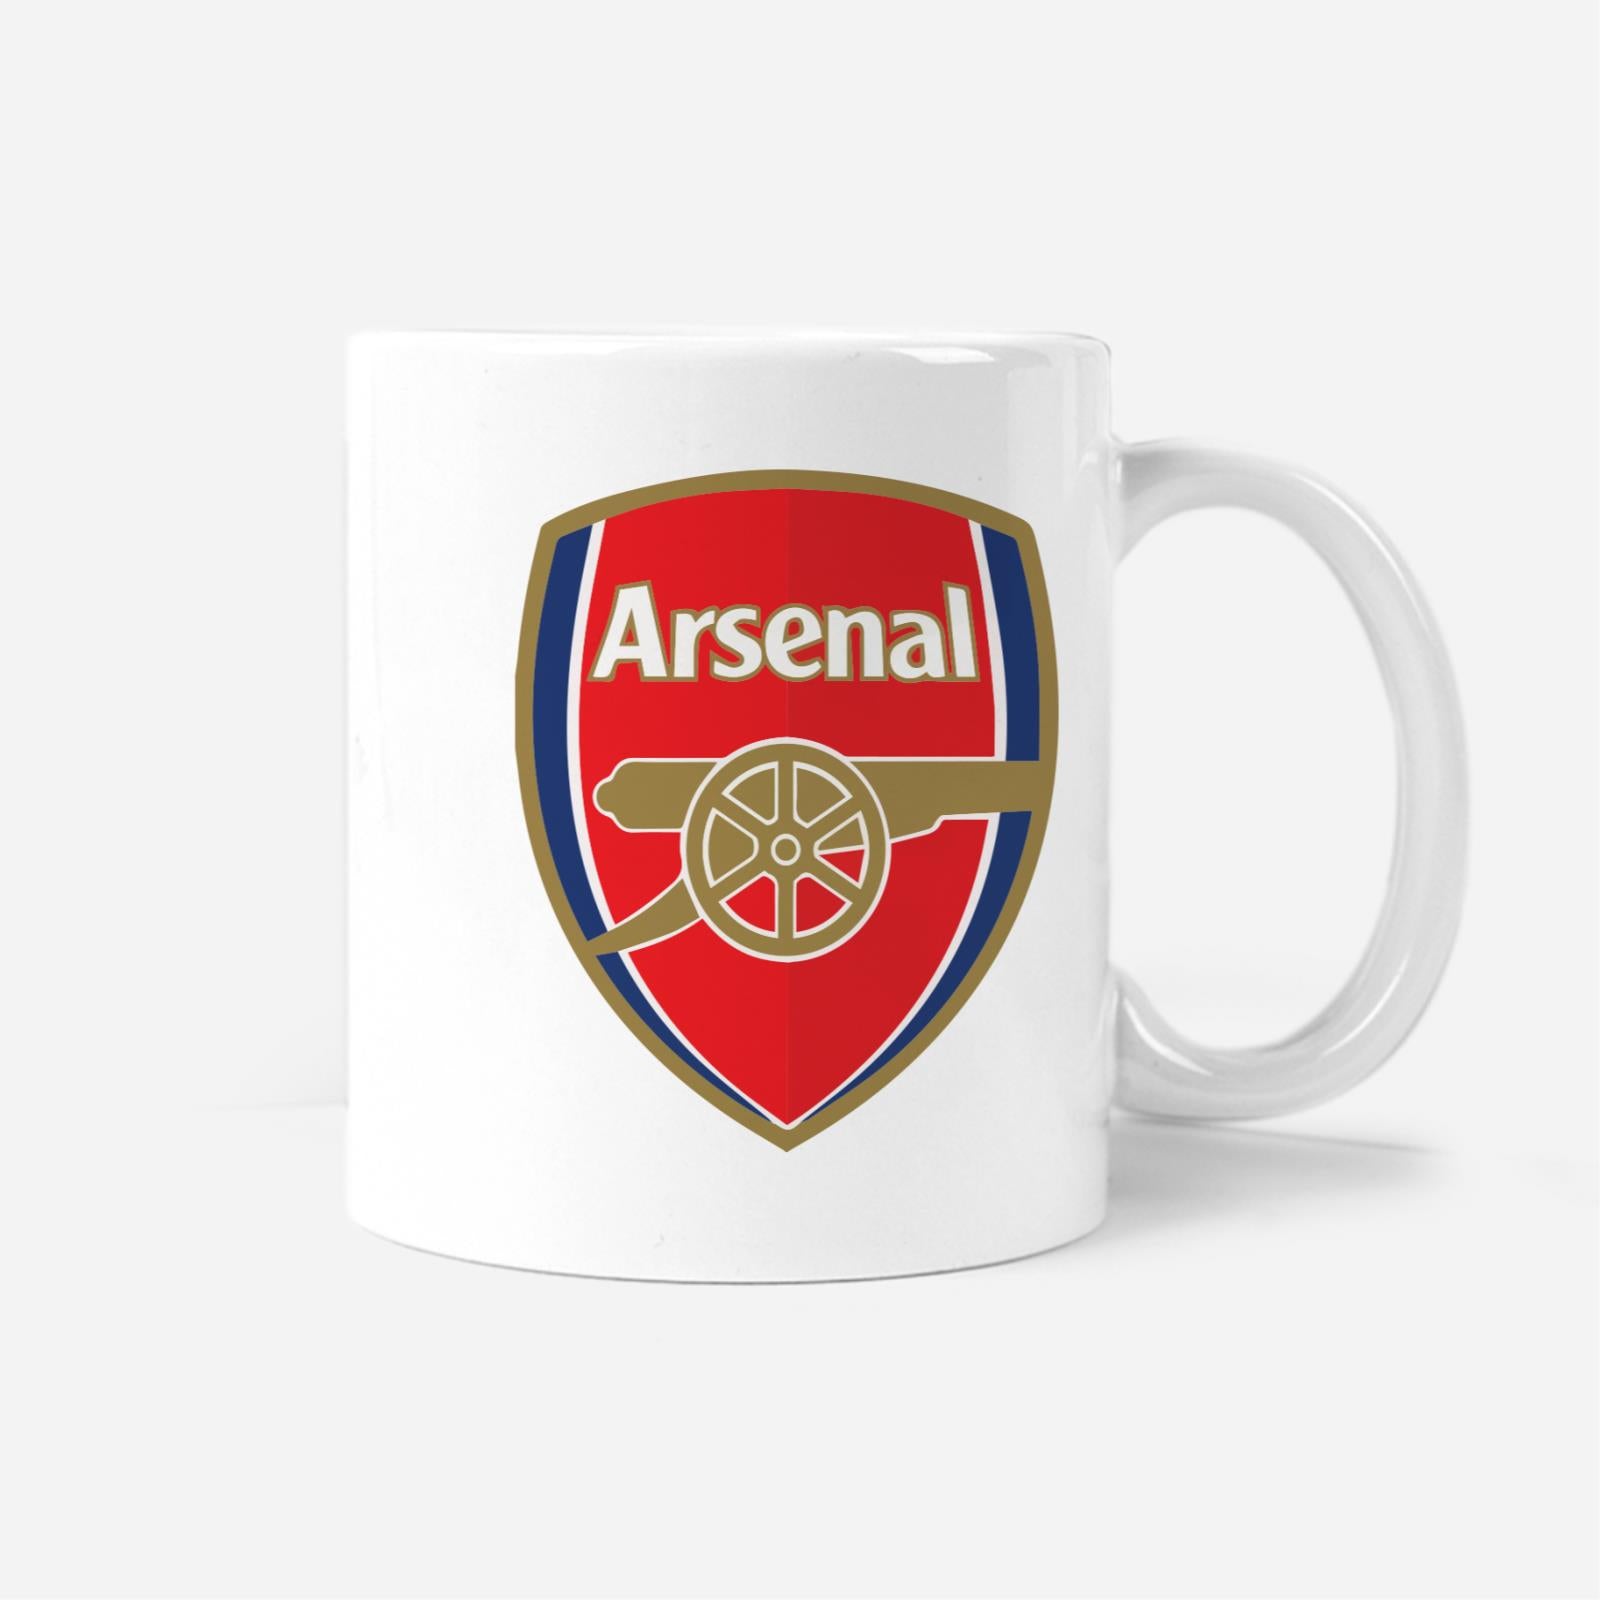 Arsenal Football Fan Mug Personalizable with Name and Number